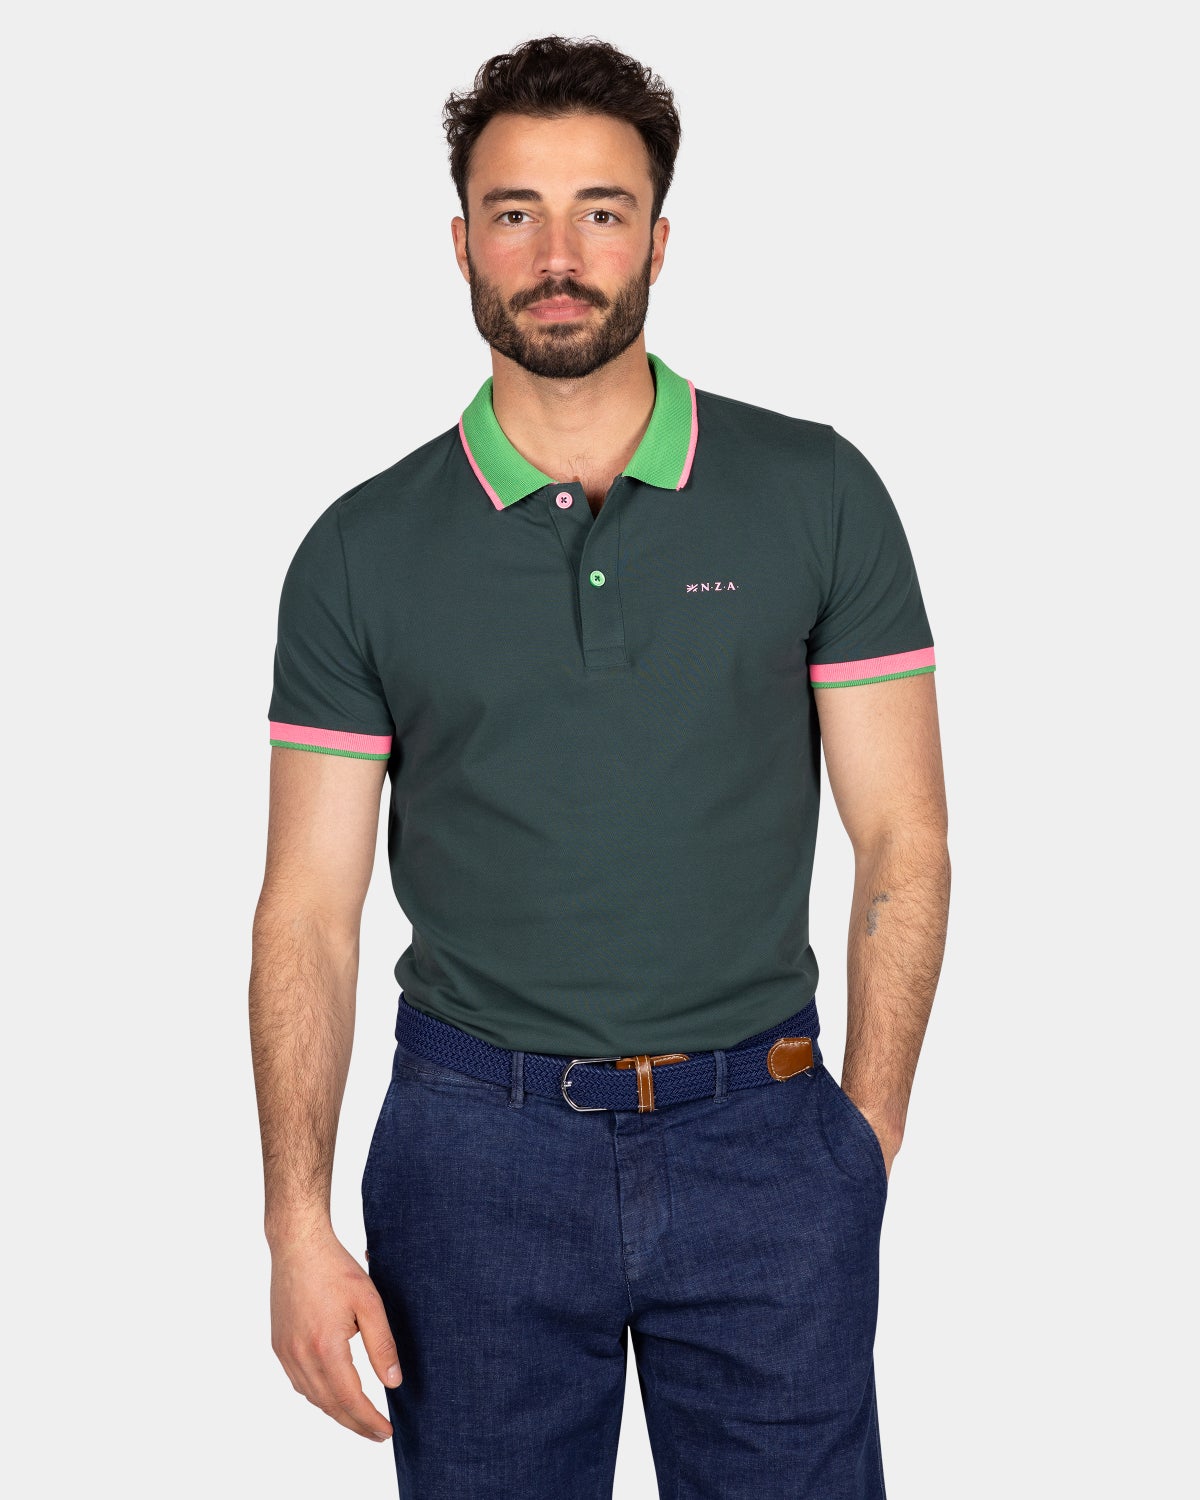 Plain poloshirt with accent colored collar - Classic Green